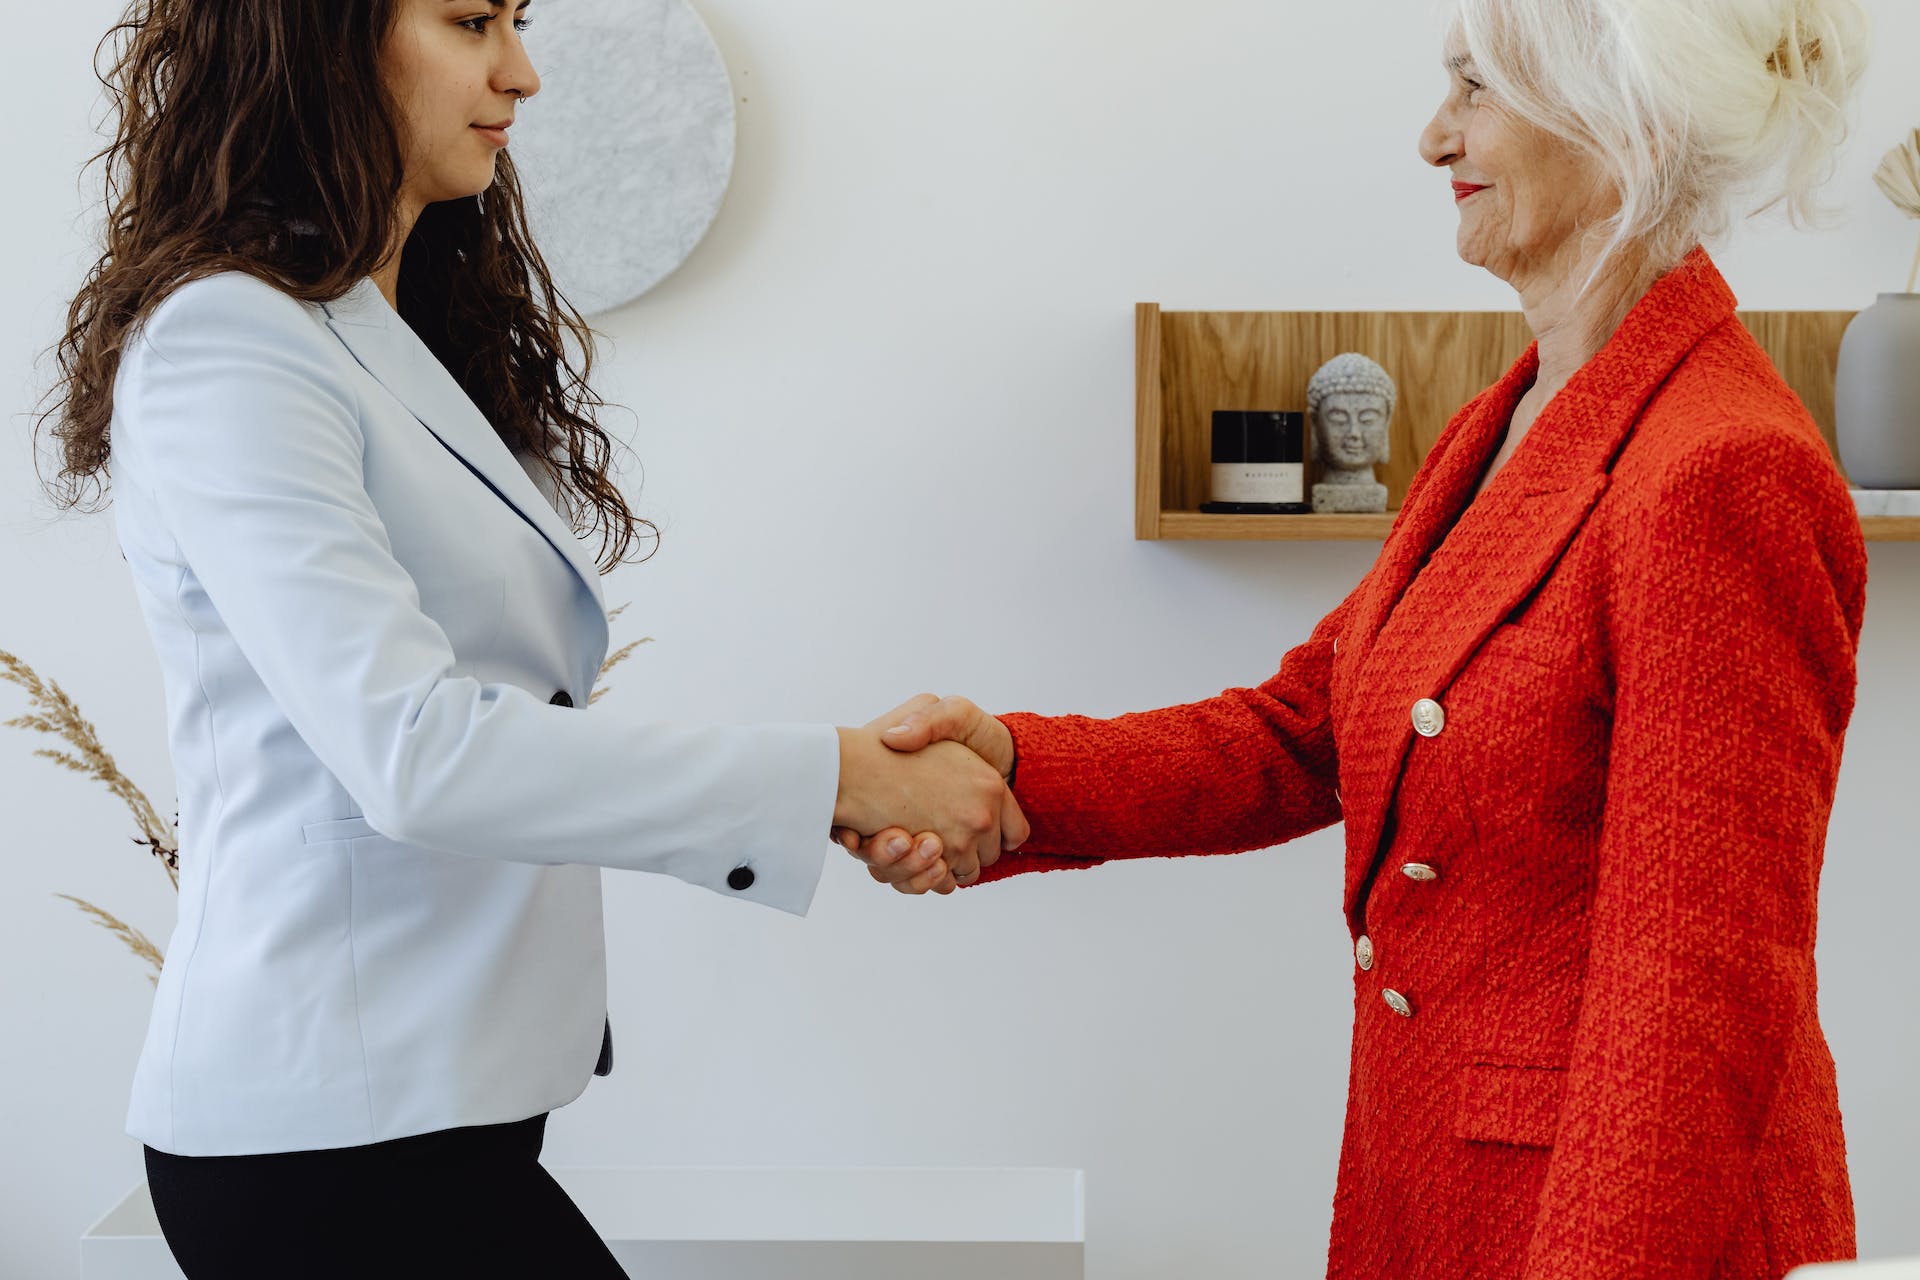 Two women shaking hands in a formal setting | Source: Pexels